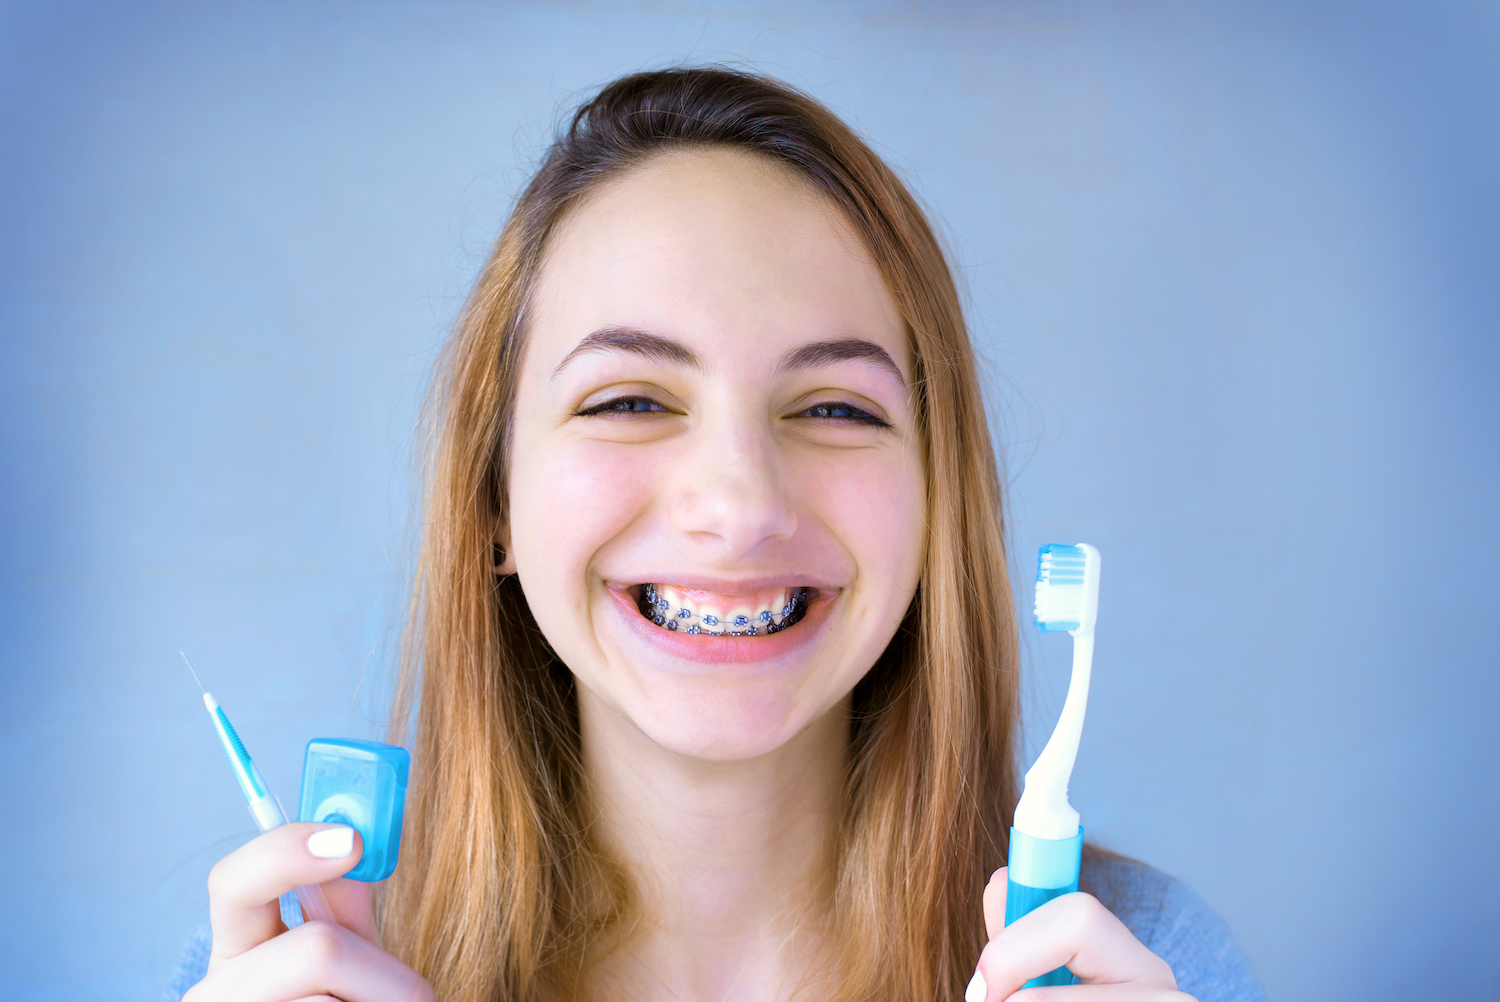 Photograph of young woman with braces holding a toothbrush and floss. Life with braces includes brushing and flossing your braces.